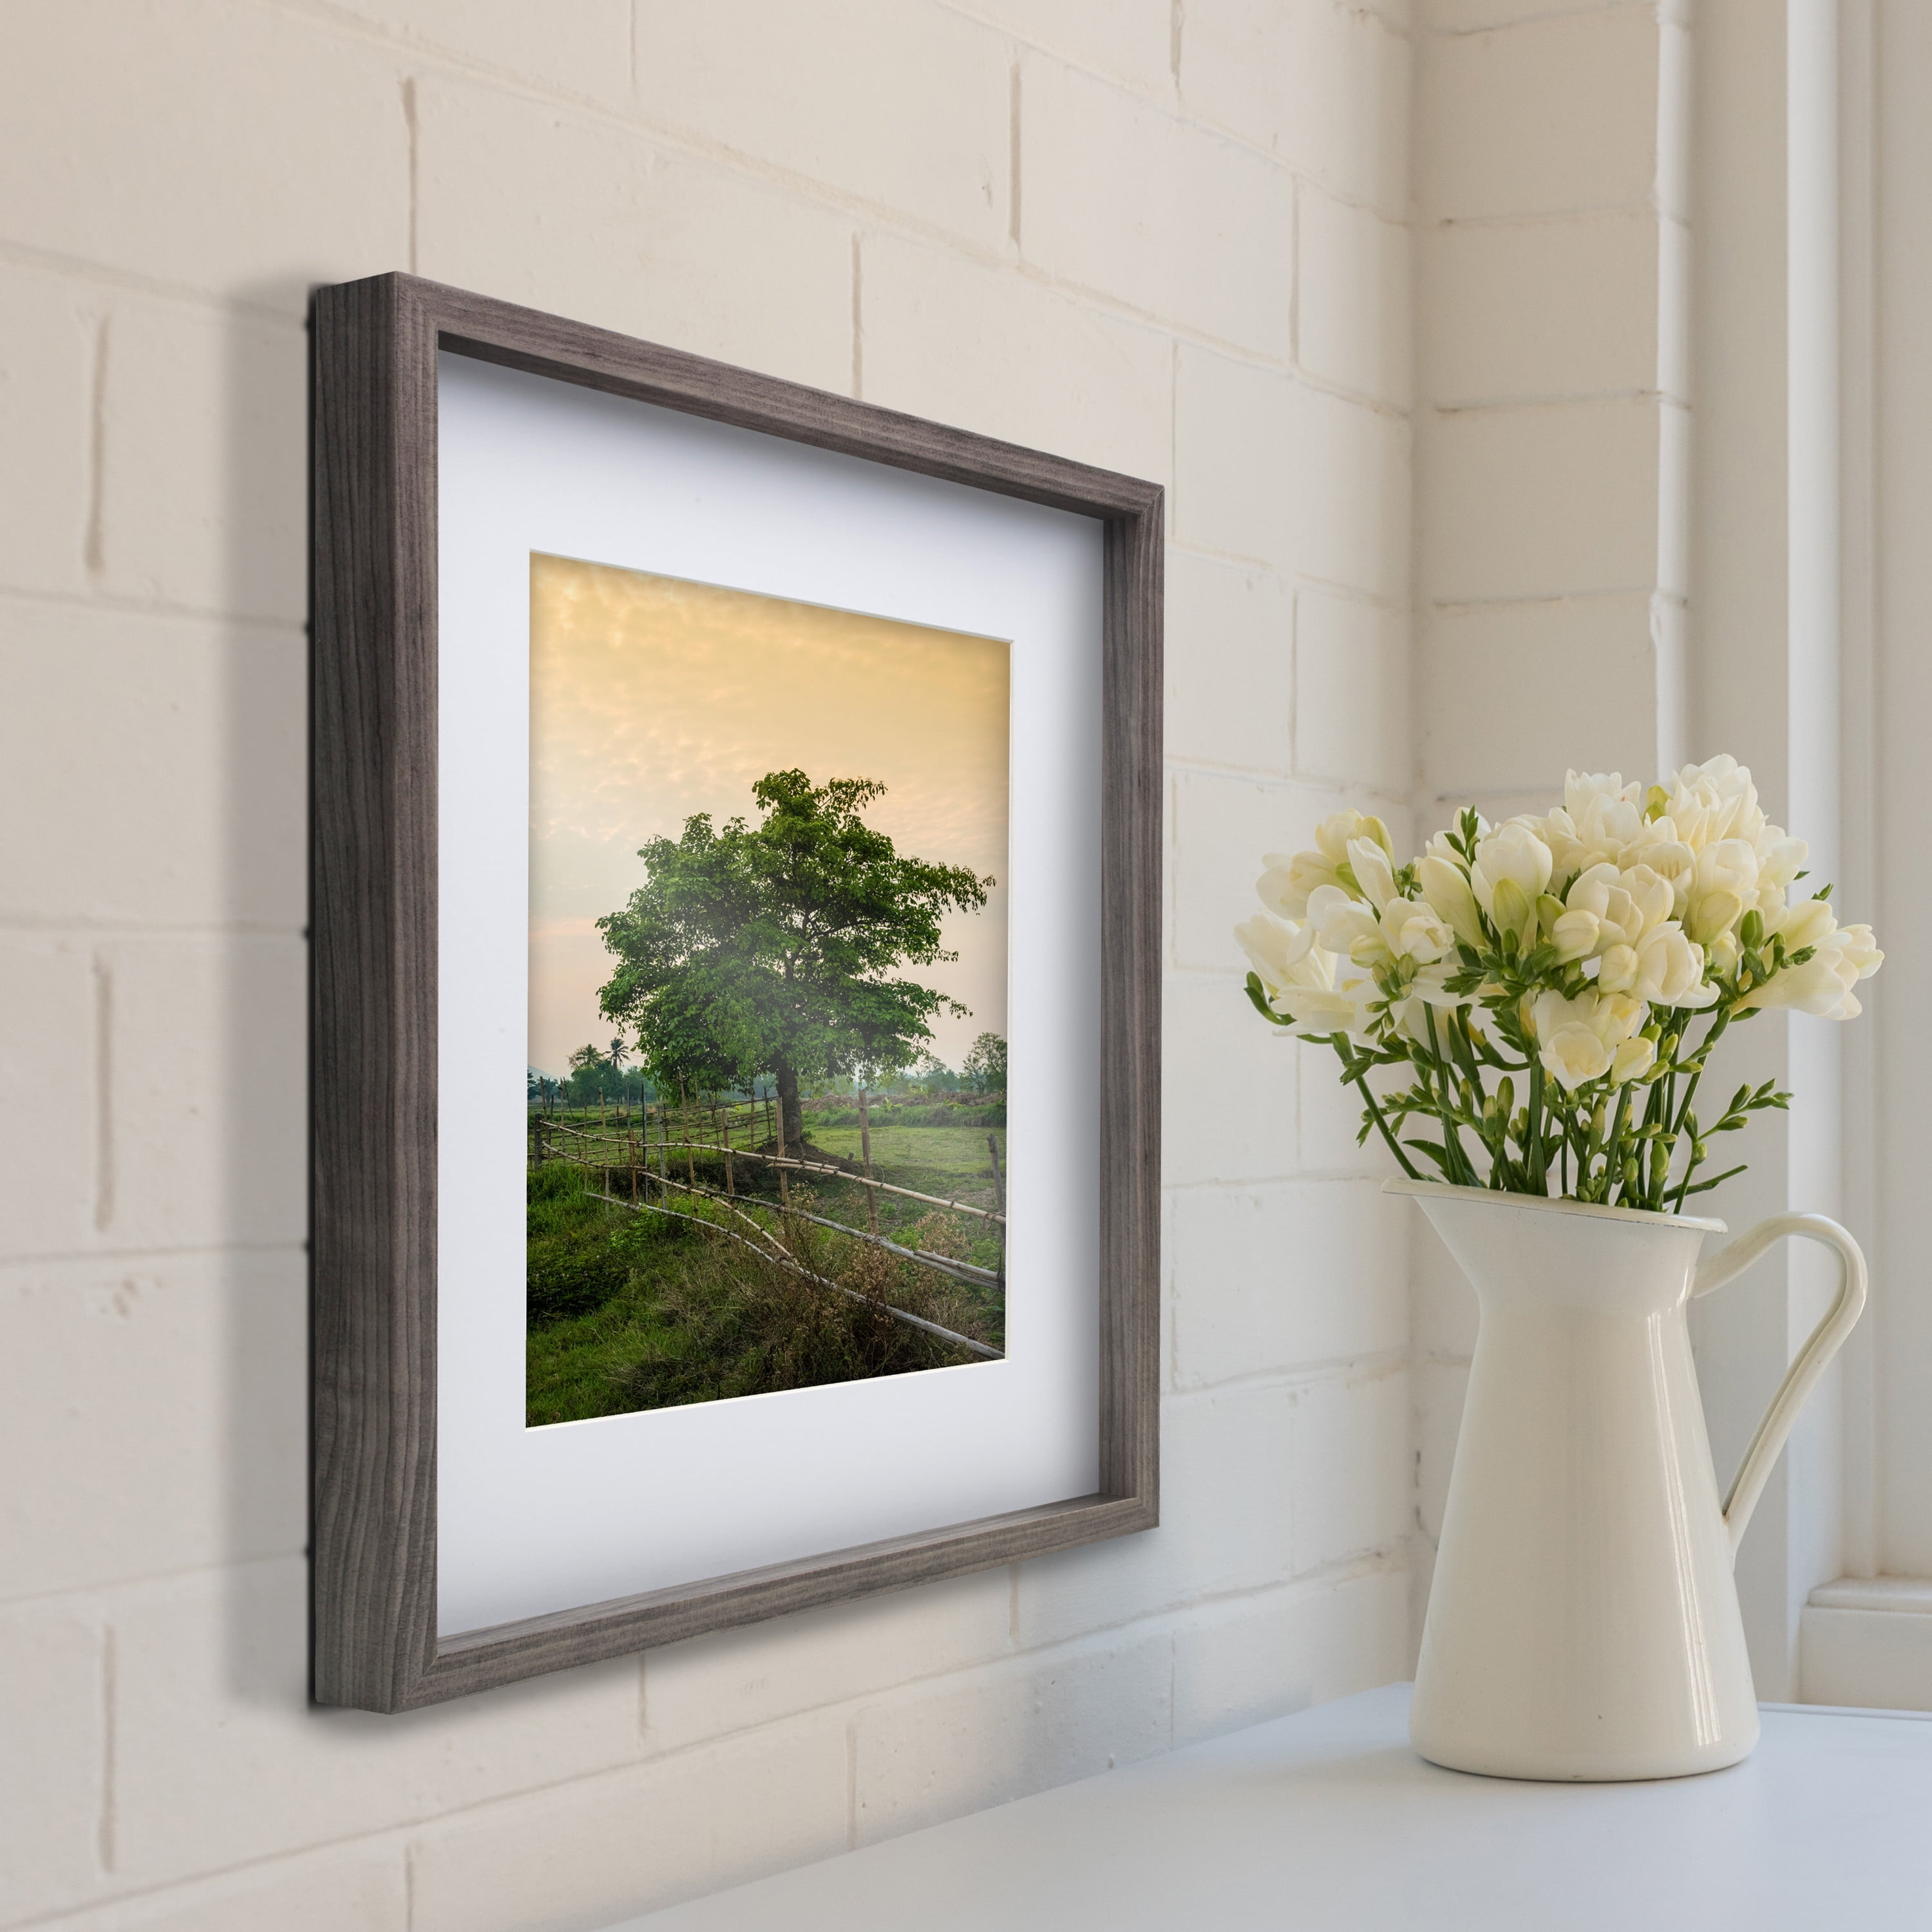 Realspace Becker Wood Picture Frame 5 34 x 7 34 Matted For 4 x 6 Natural -  Office Depot